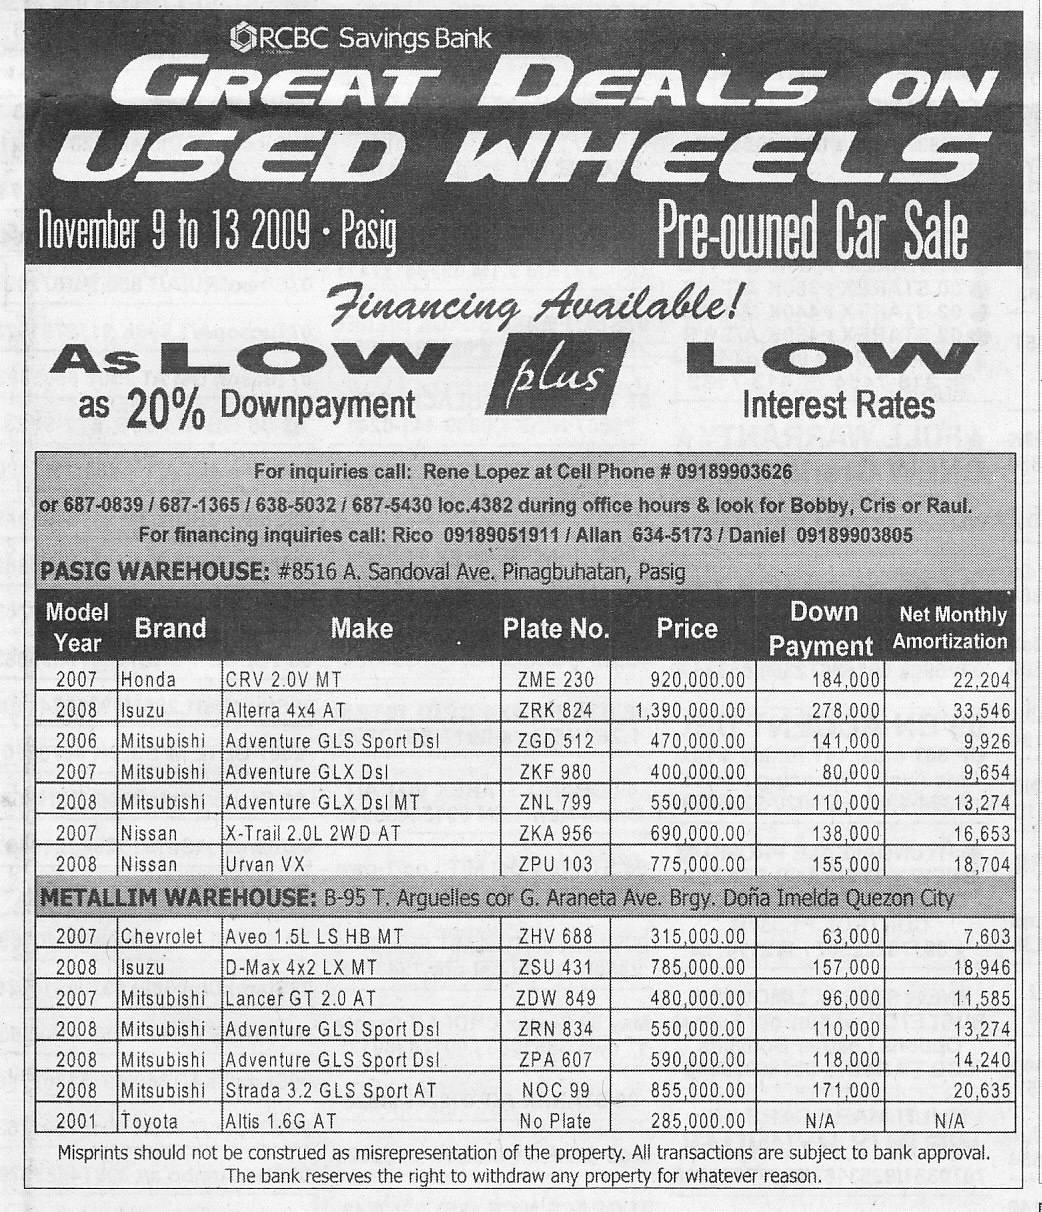 RCBC-Savings-Bank-Great-Deal-On-Used-Wheels-Pre-Owned-Car-Sale-Nov-13-2009